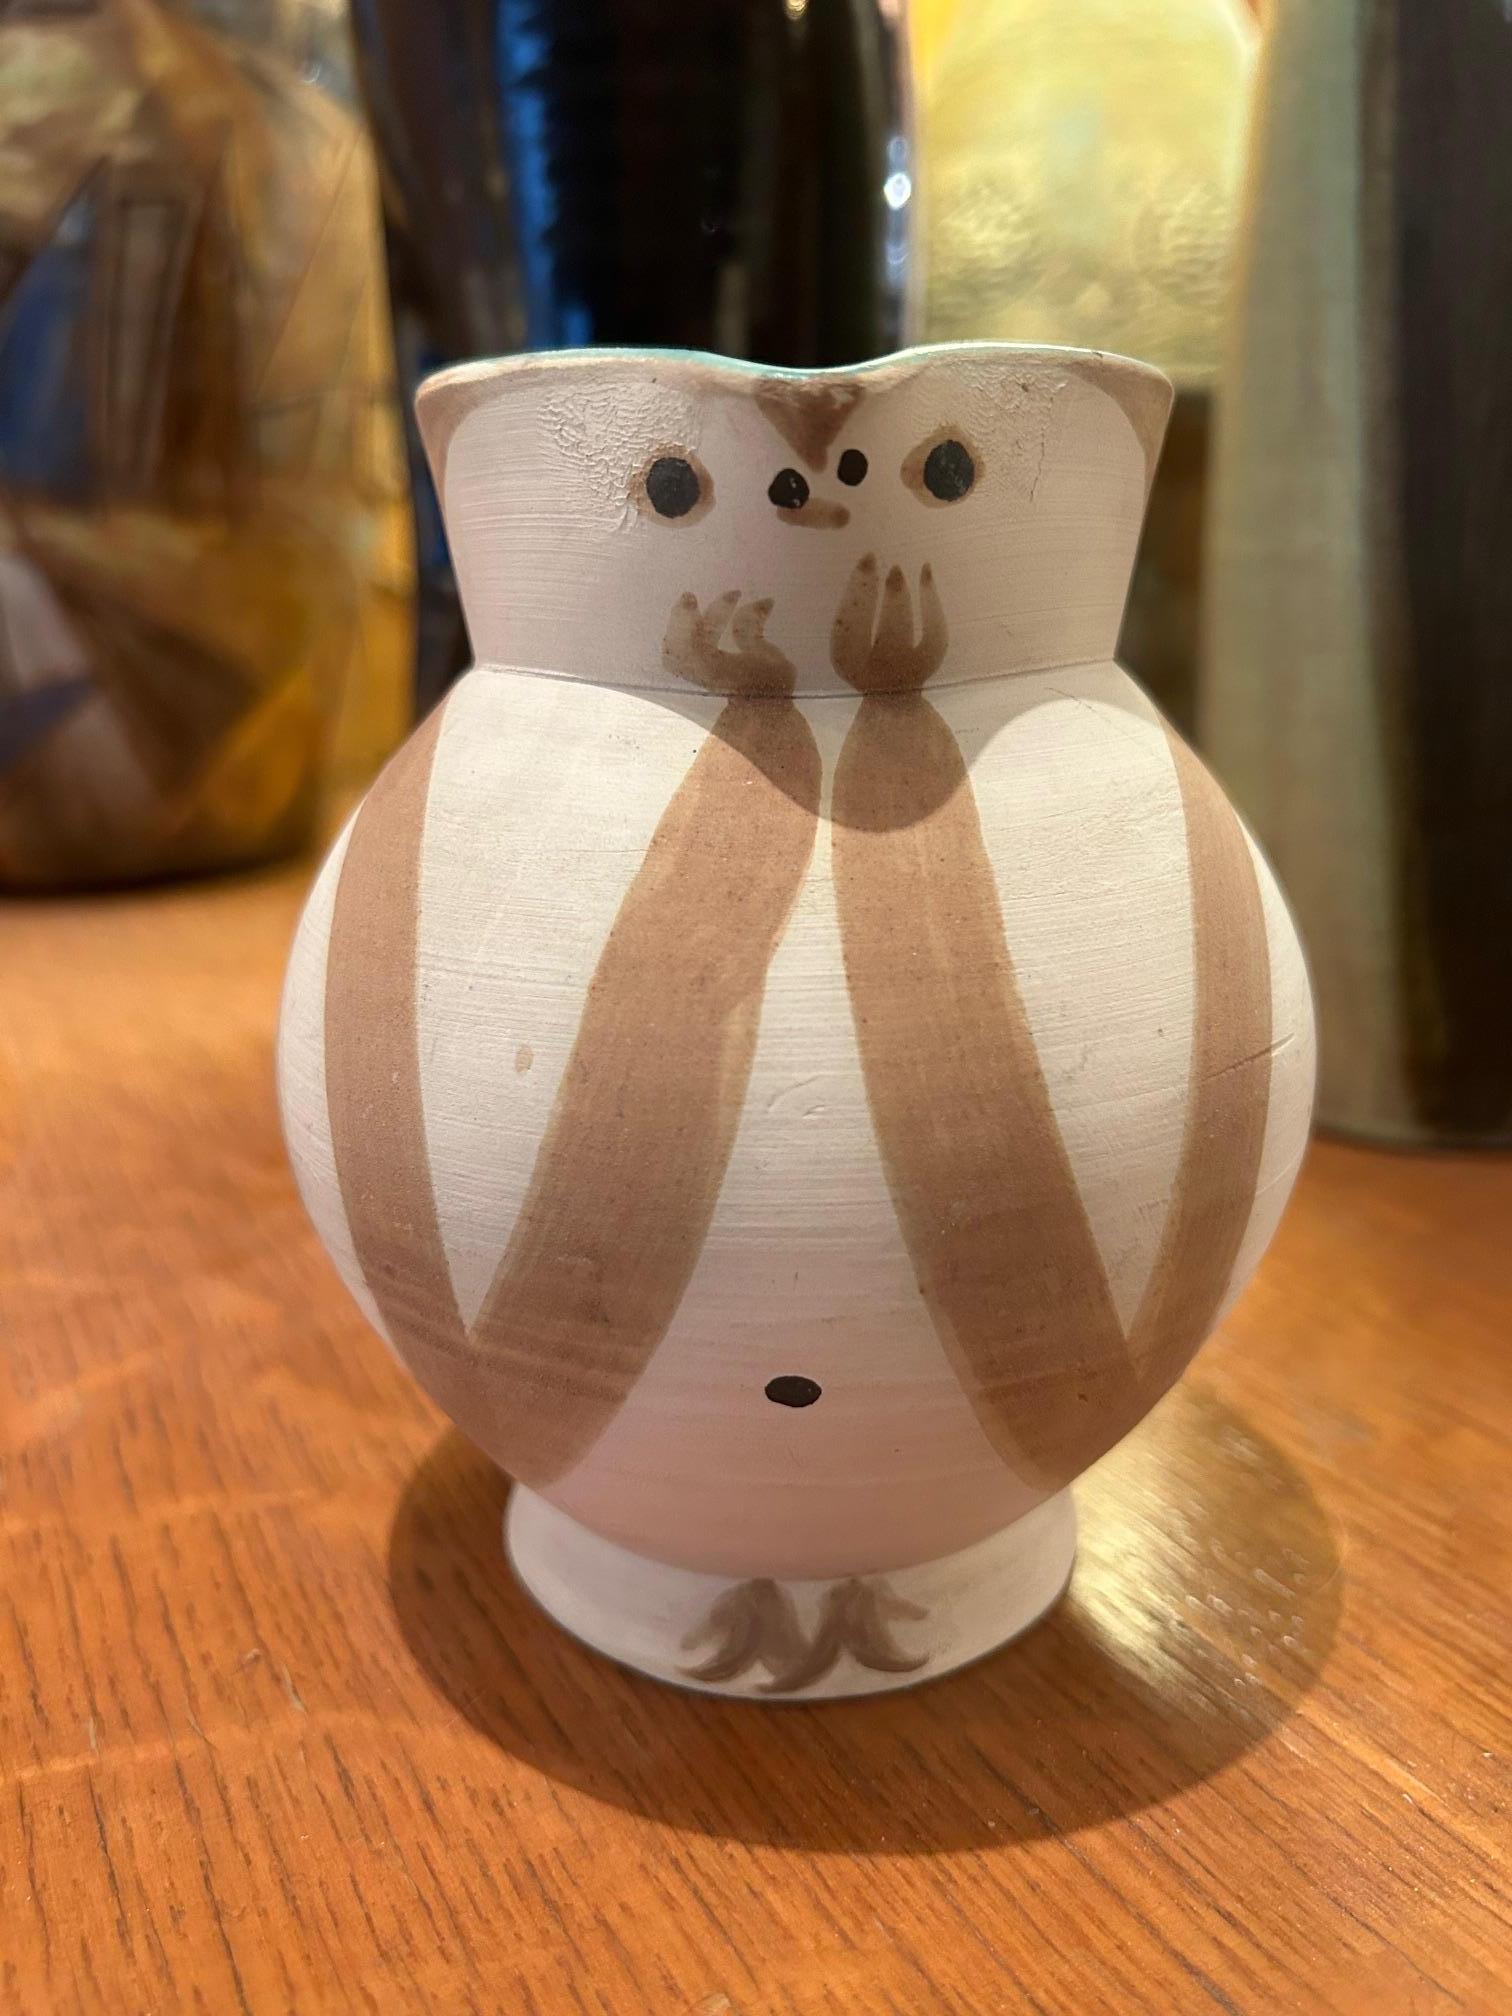 Ceramic pitcher by Picasso, model created in 1949 and limited production by Madoura until 1970
Zoomorphic owl design
Authentical multiples, 200 pieces
Official stamp 